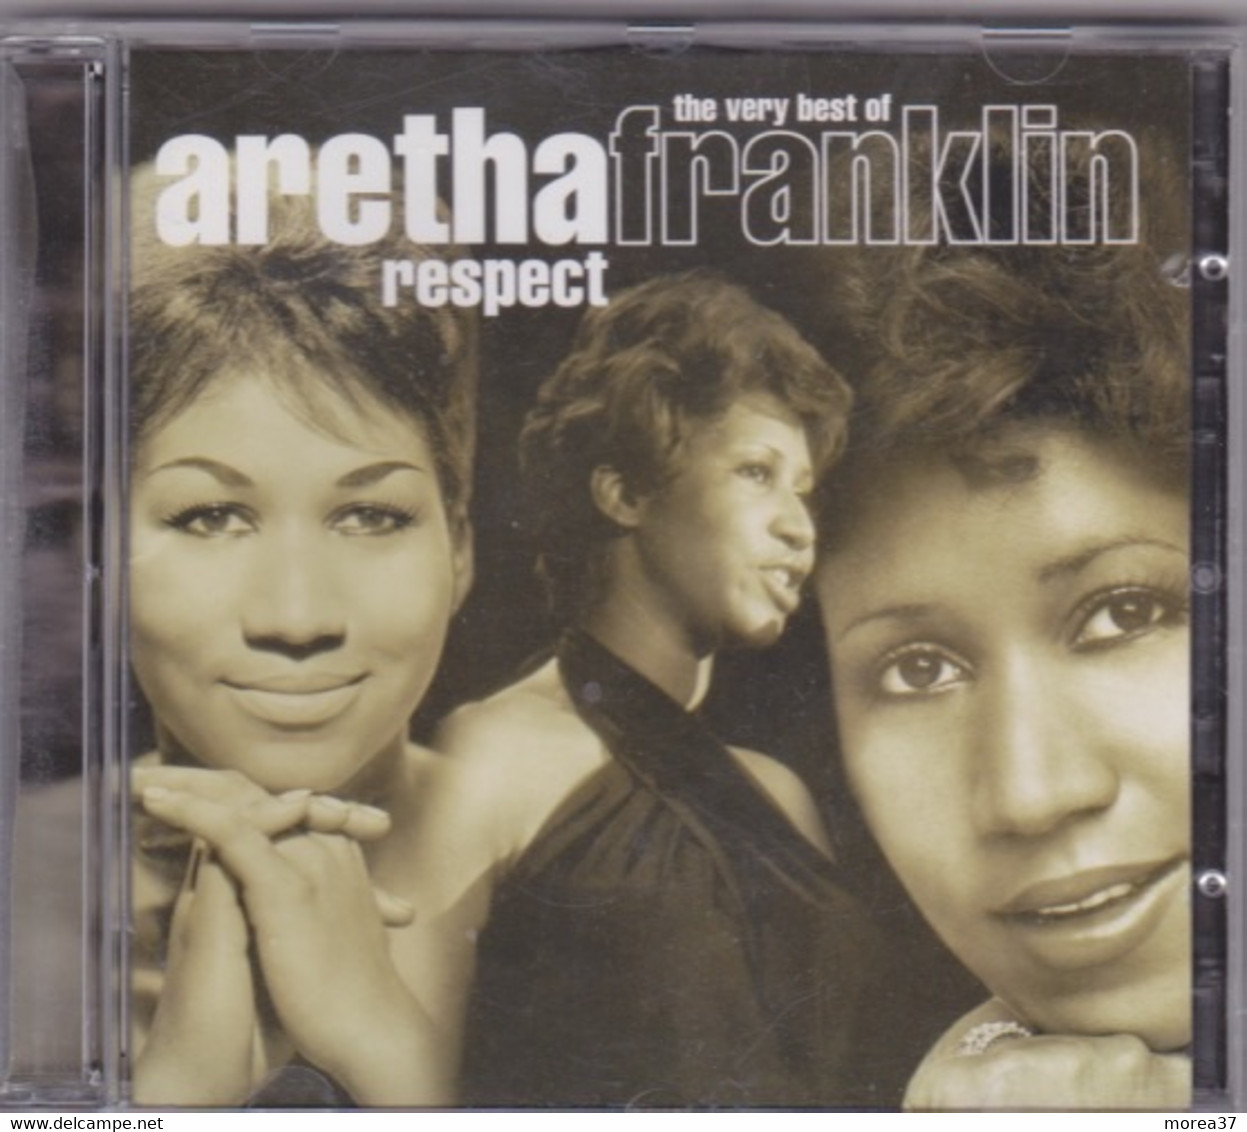 ARETHA FRANKLIN The Very Best  2 Cds   RESPECT   (CD1) - Soul - R&B